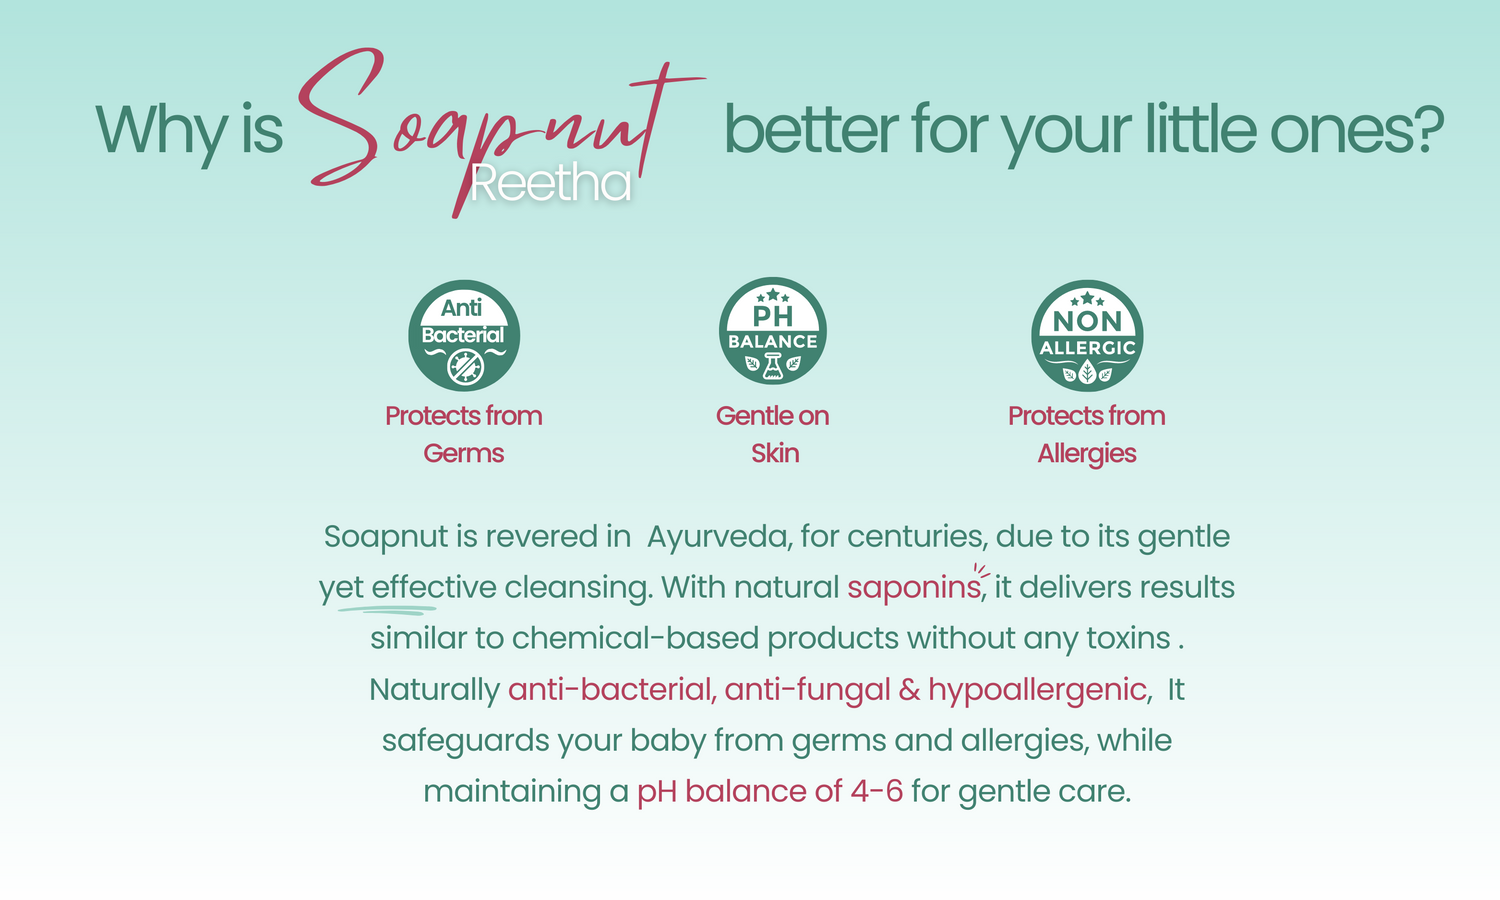 Benefits of soapnuts such as being anti bacterial, ph balanced and hypoallergenic. With a body of text below supporting the effectiveness of soapnuts